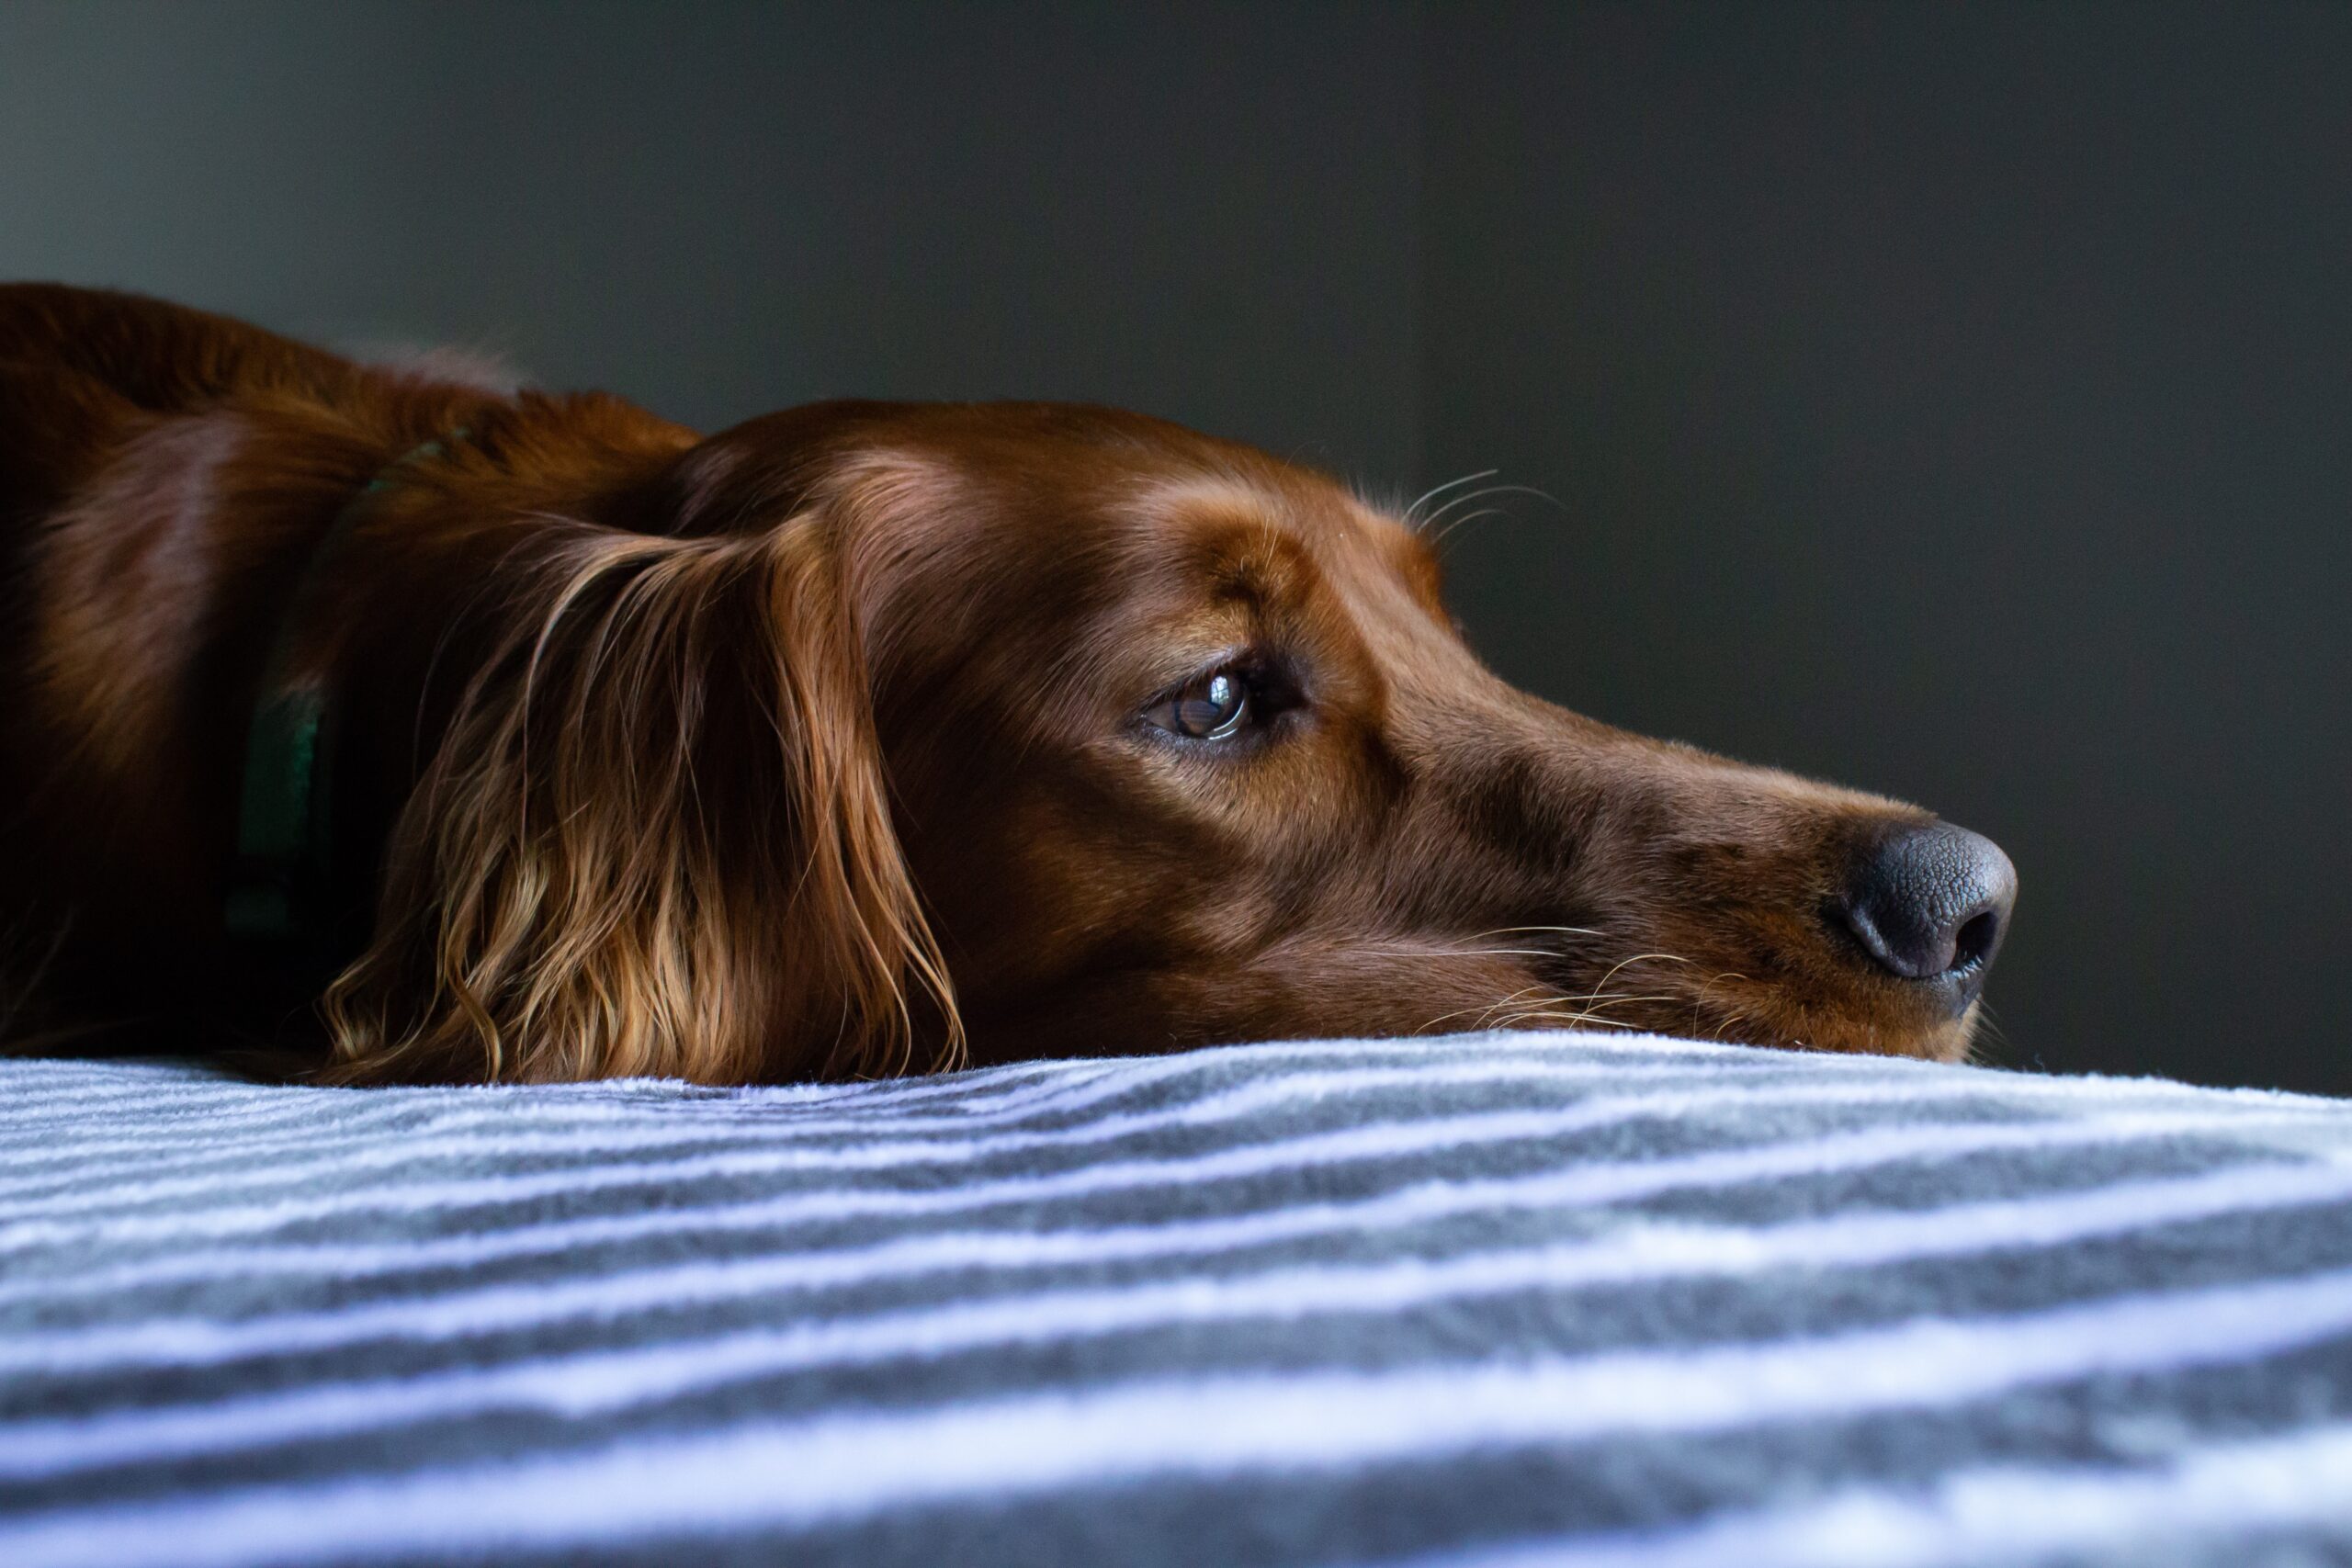 short-coat brown dog lying on a blue and white striped bedspread image